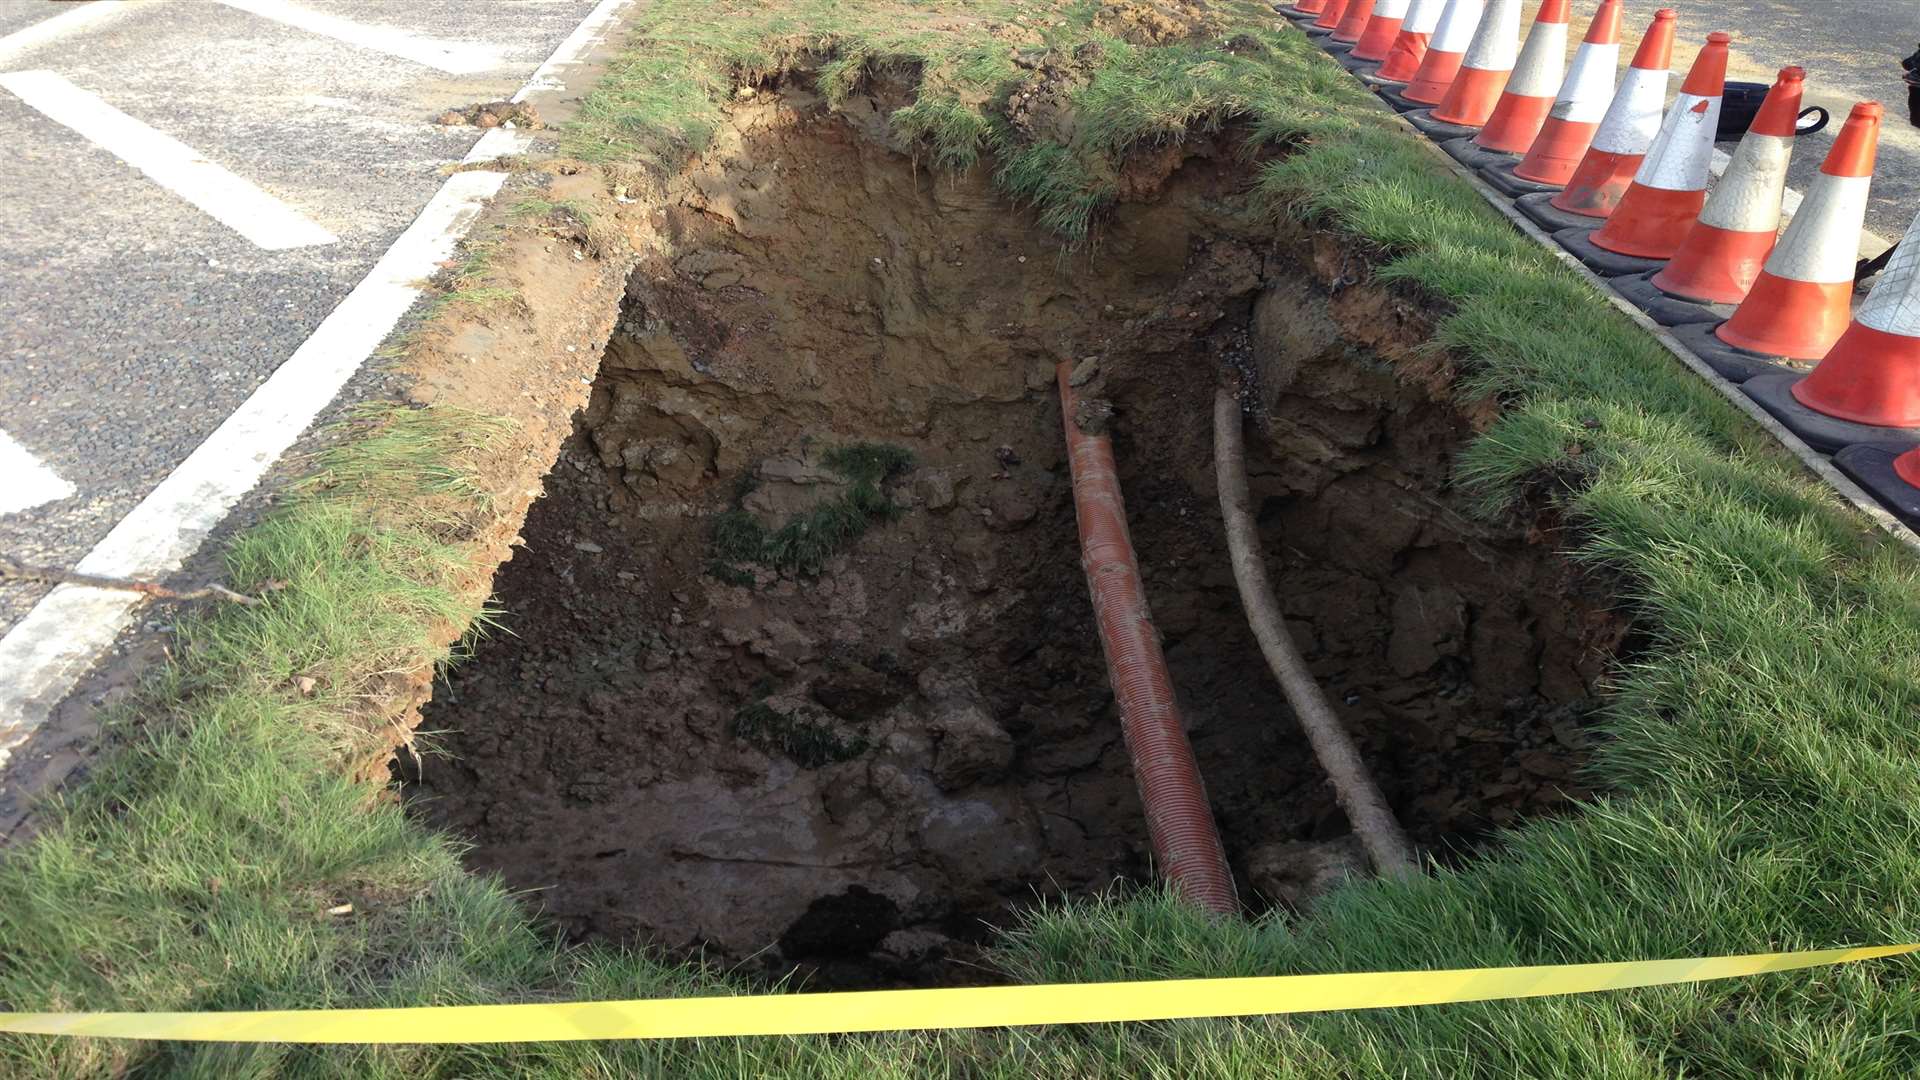 Work has uncovered this sinkhole